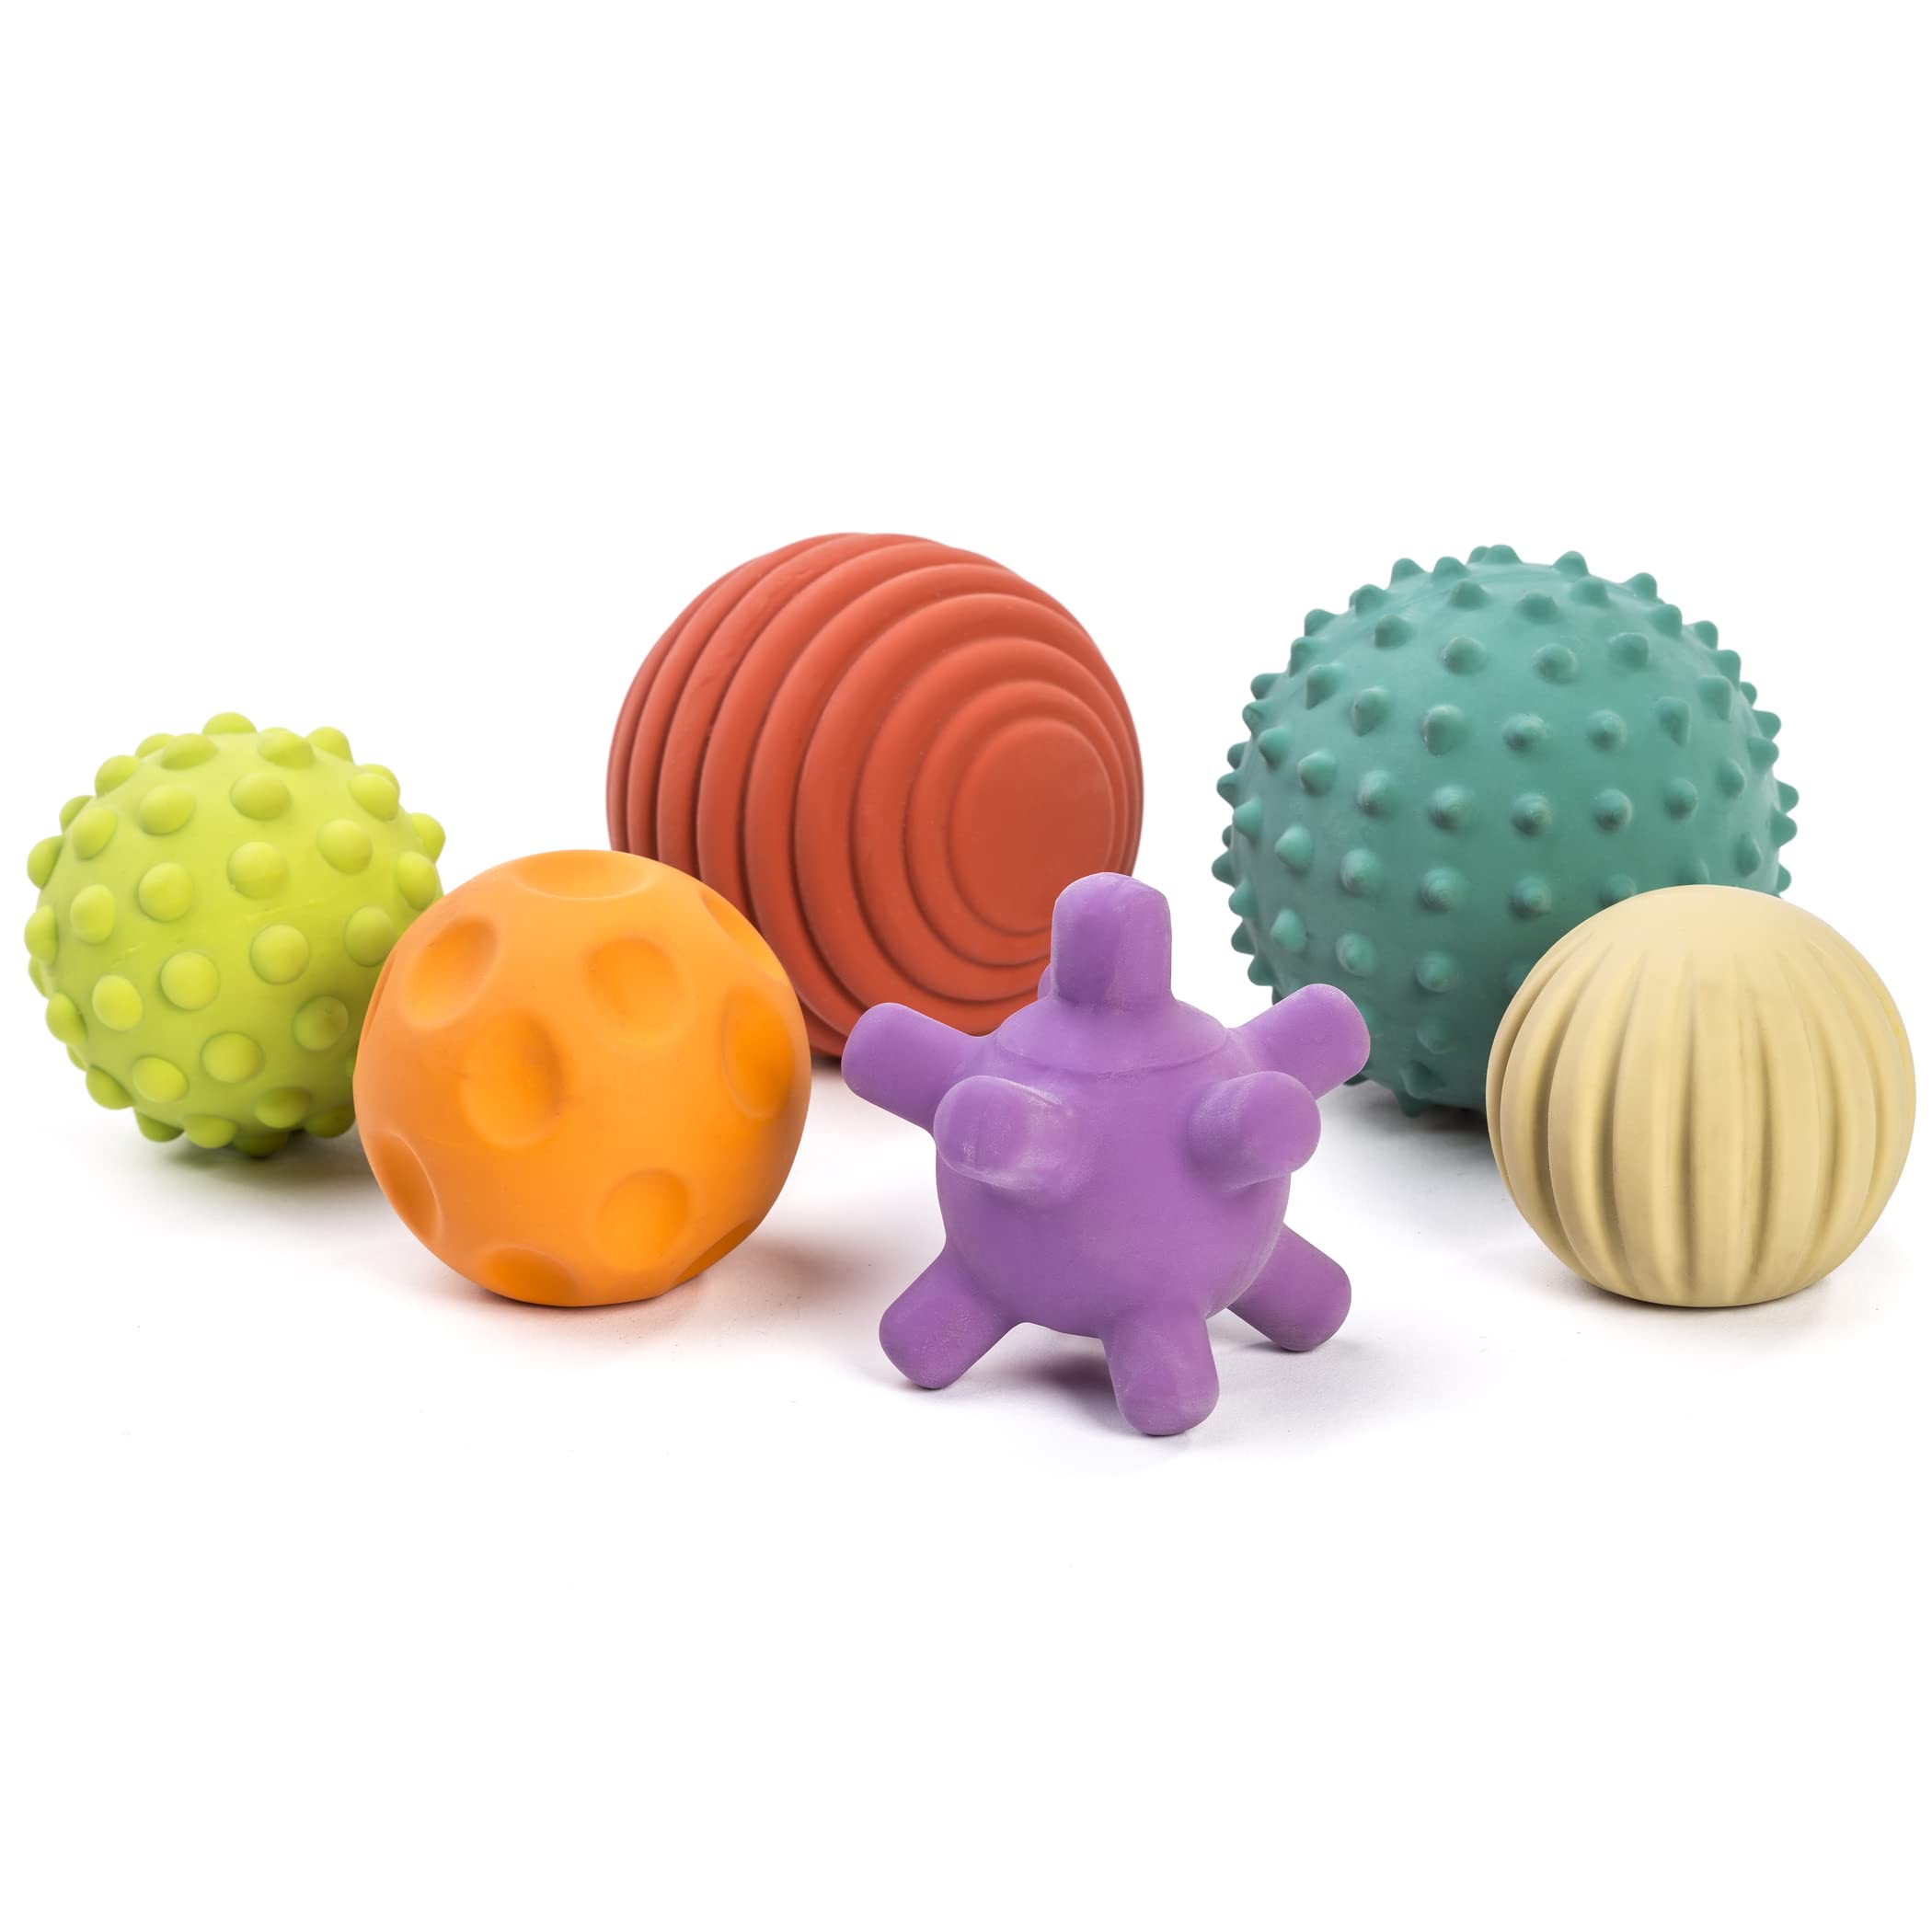 Miniland 6 Sensory Balls, Babies Birth to Toddlers Age 4, Natural Rubber Latex, Soft Teething Toys, Easy Grip Play, Textured, Colors Multi-Sensory Stimulation, Motor Skill Development